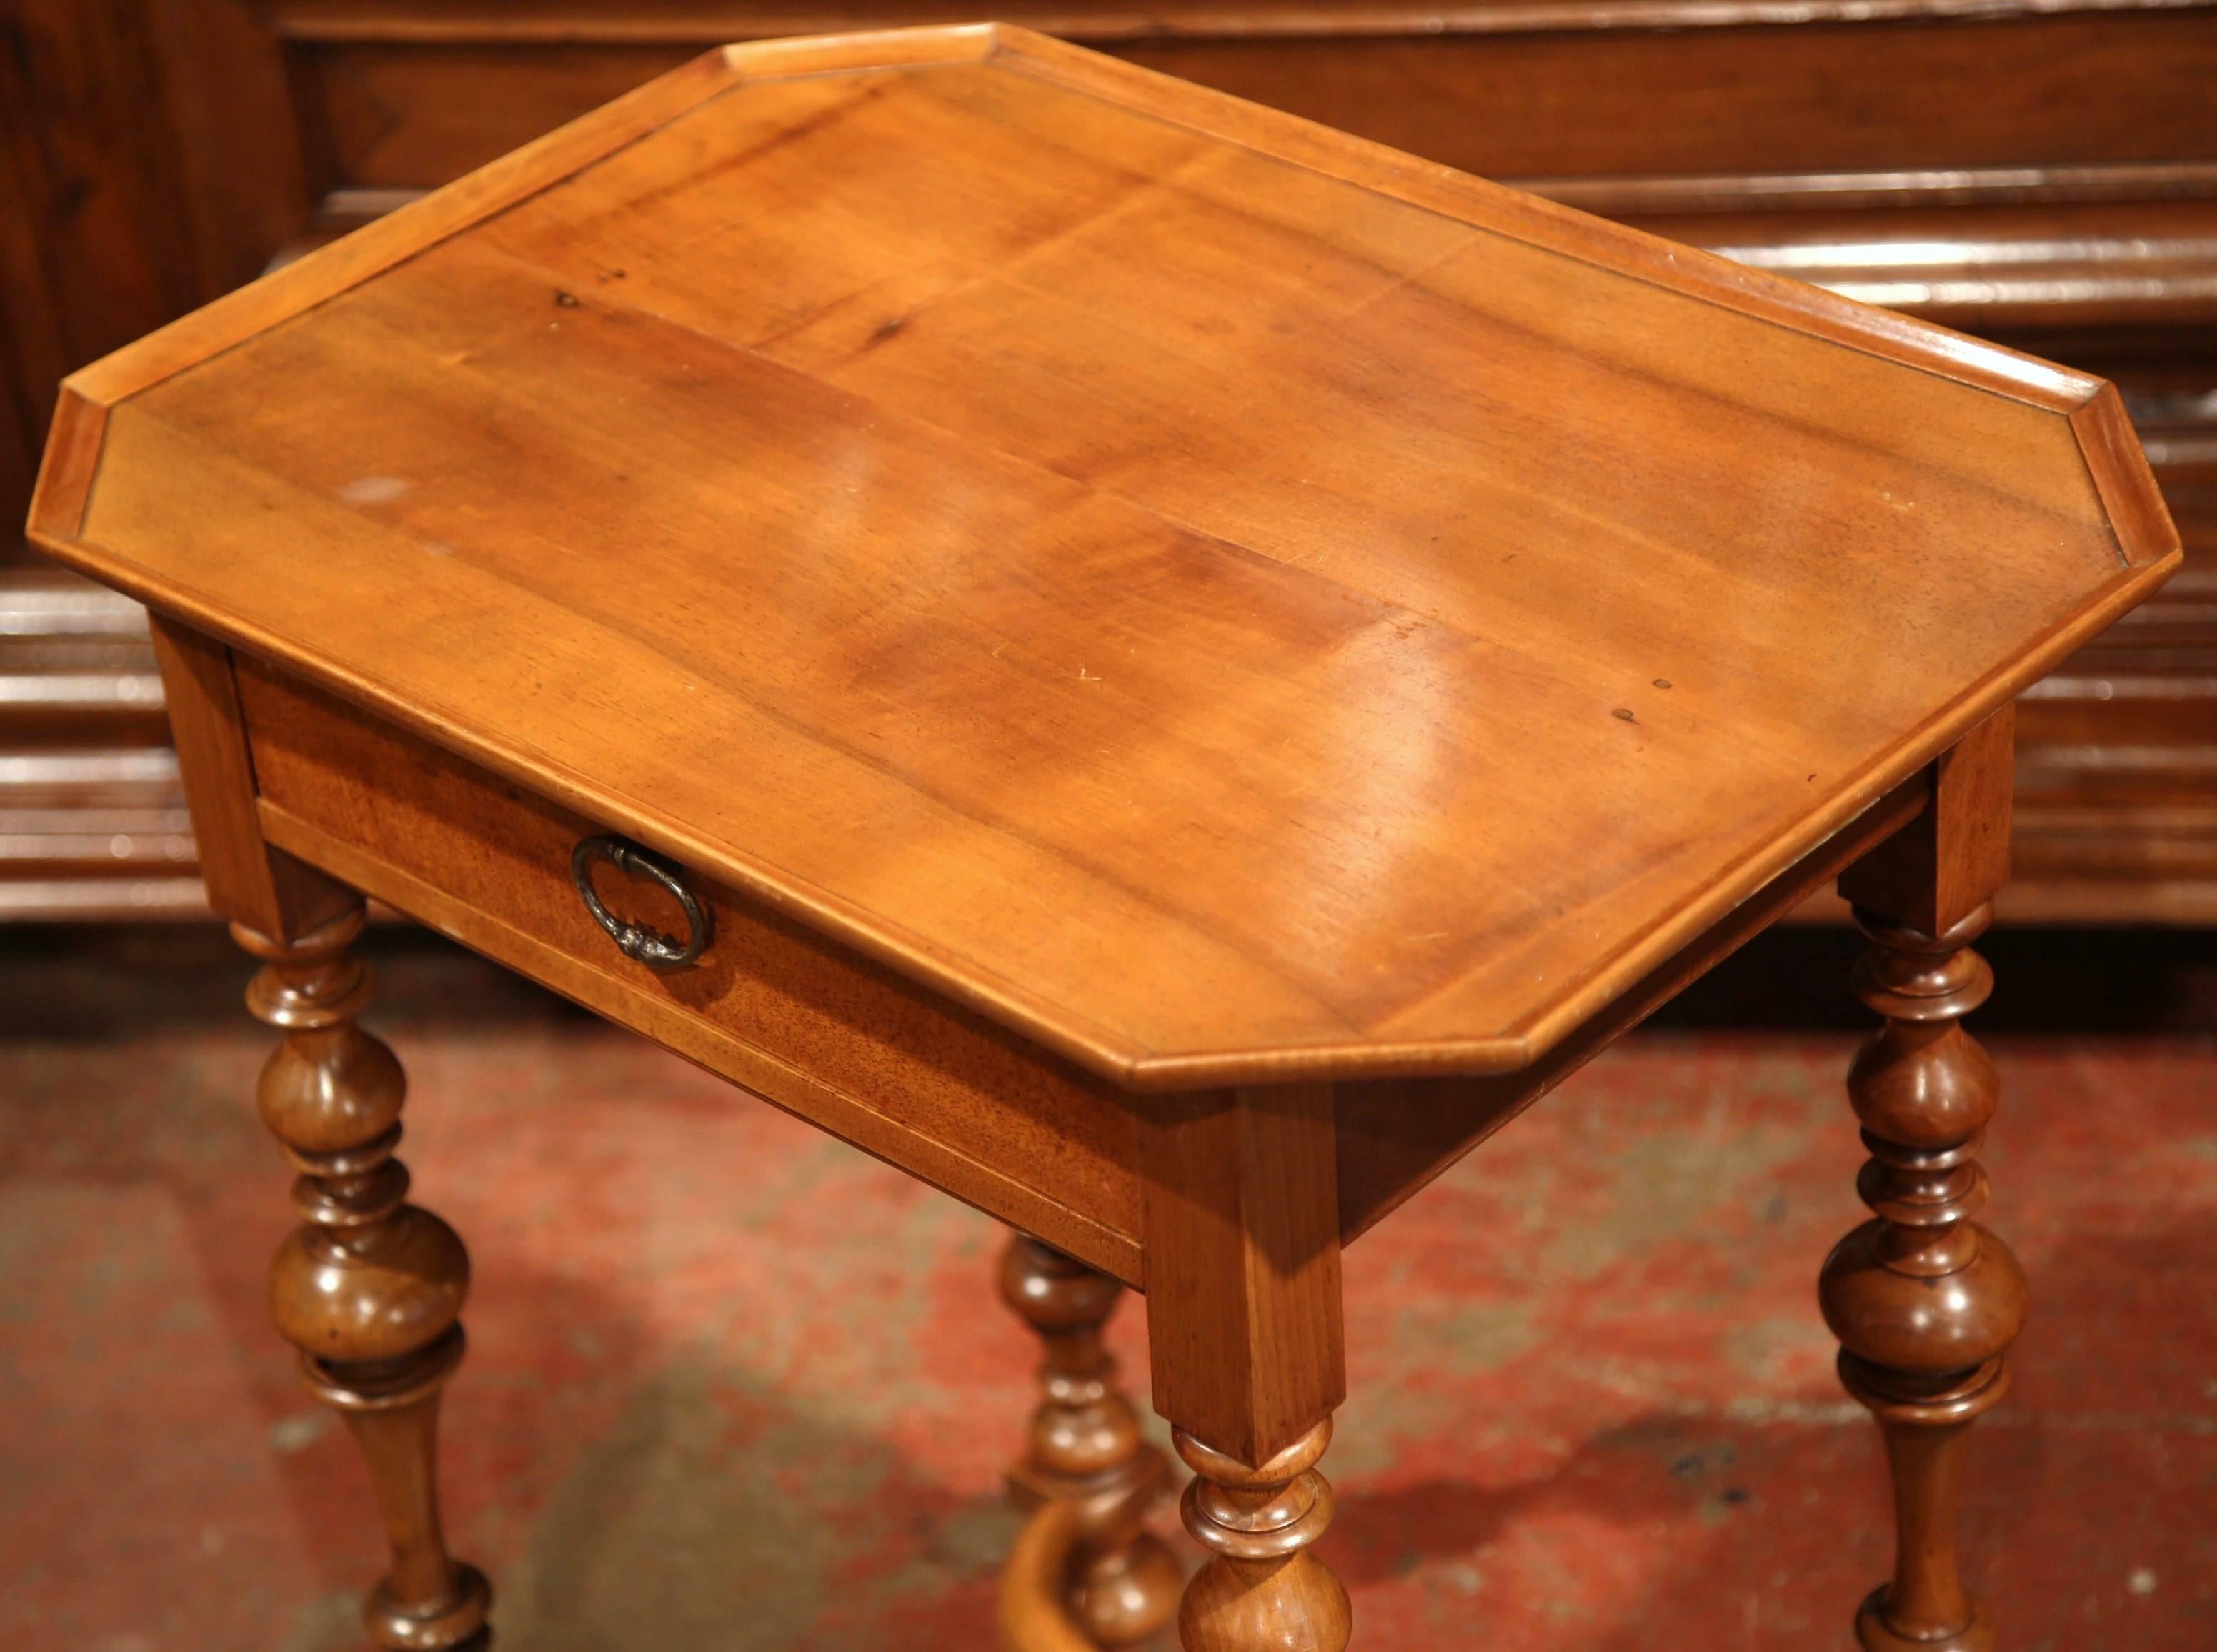 This elegant, small antique fruitwood end table was created in Southern France, circa 1880. This table features four turned legs with a X-stretcher and a carved centre finial. Across the front is a single drawer with an iron handle. The table is